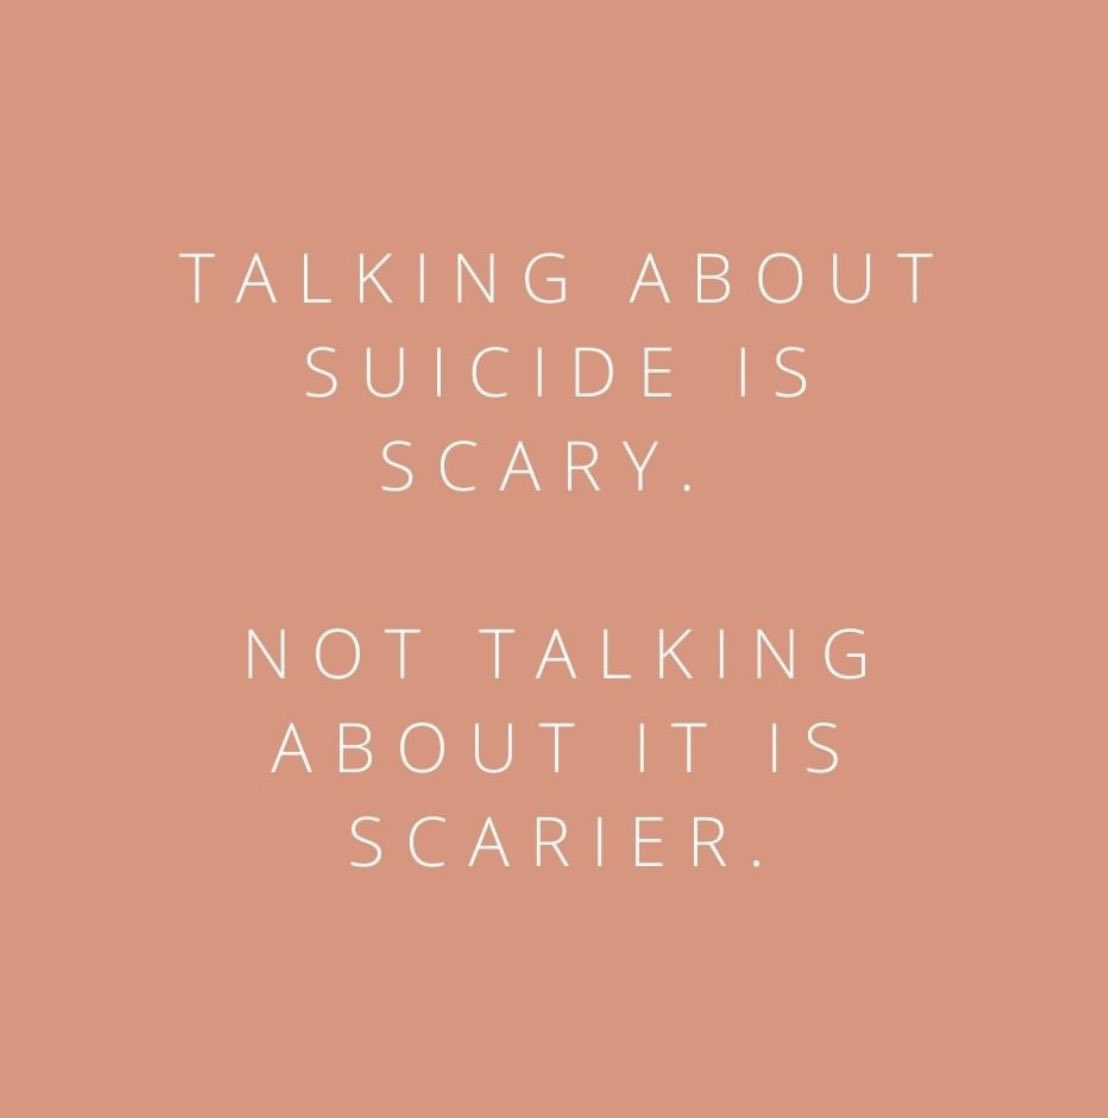 It’s happening too much! Check on your friends. Ask them about Suicide if you are the least bit concerned!